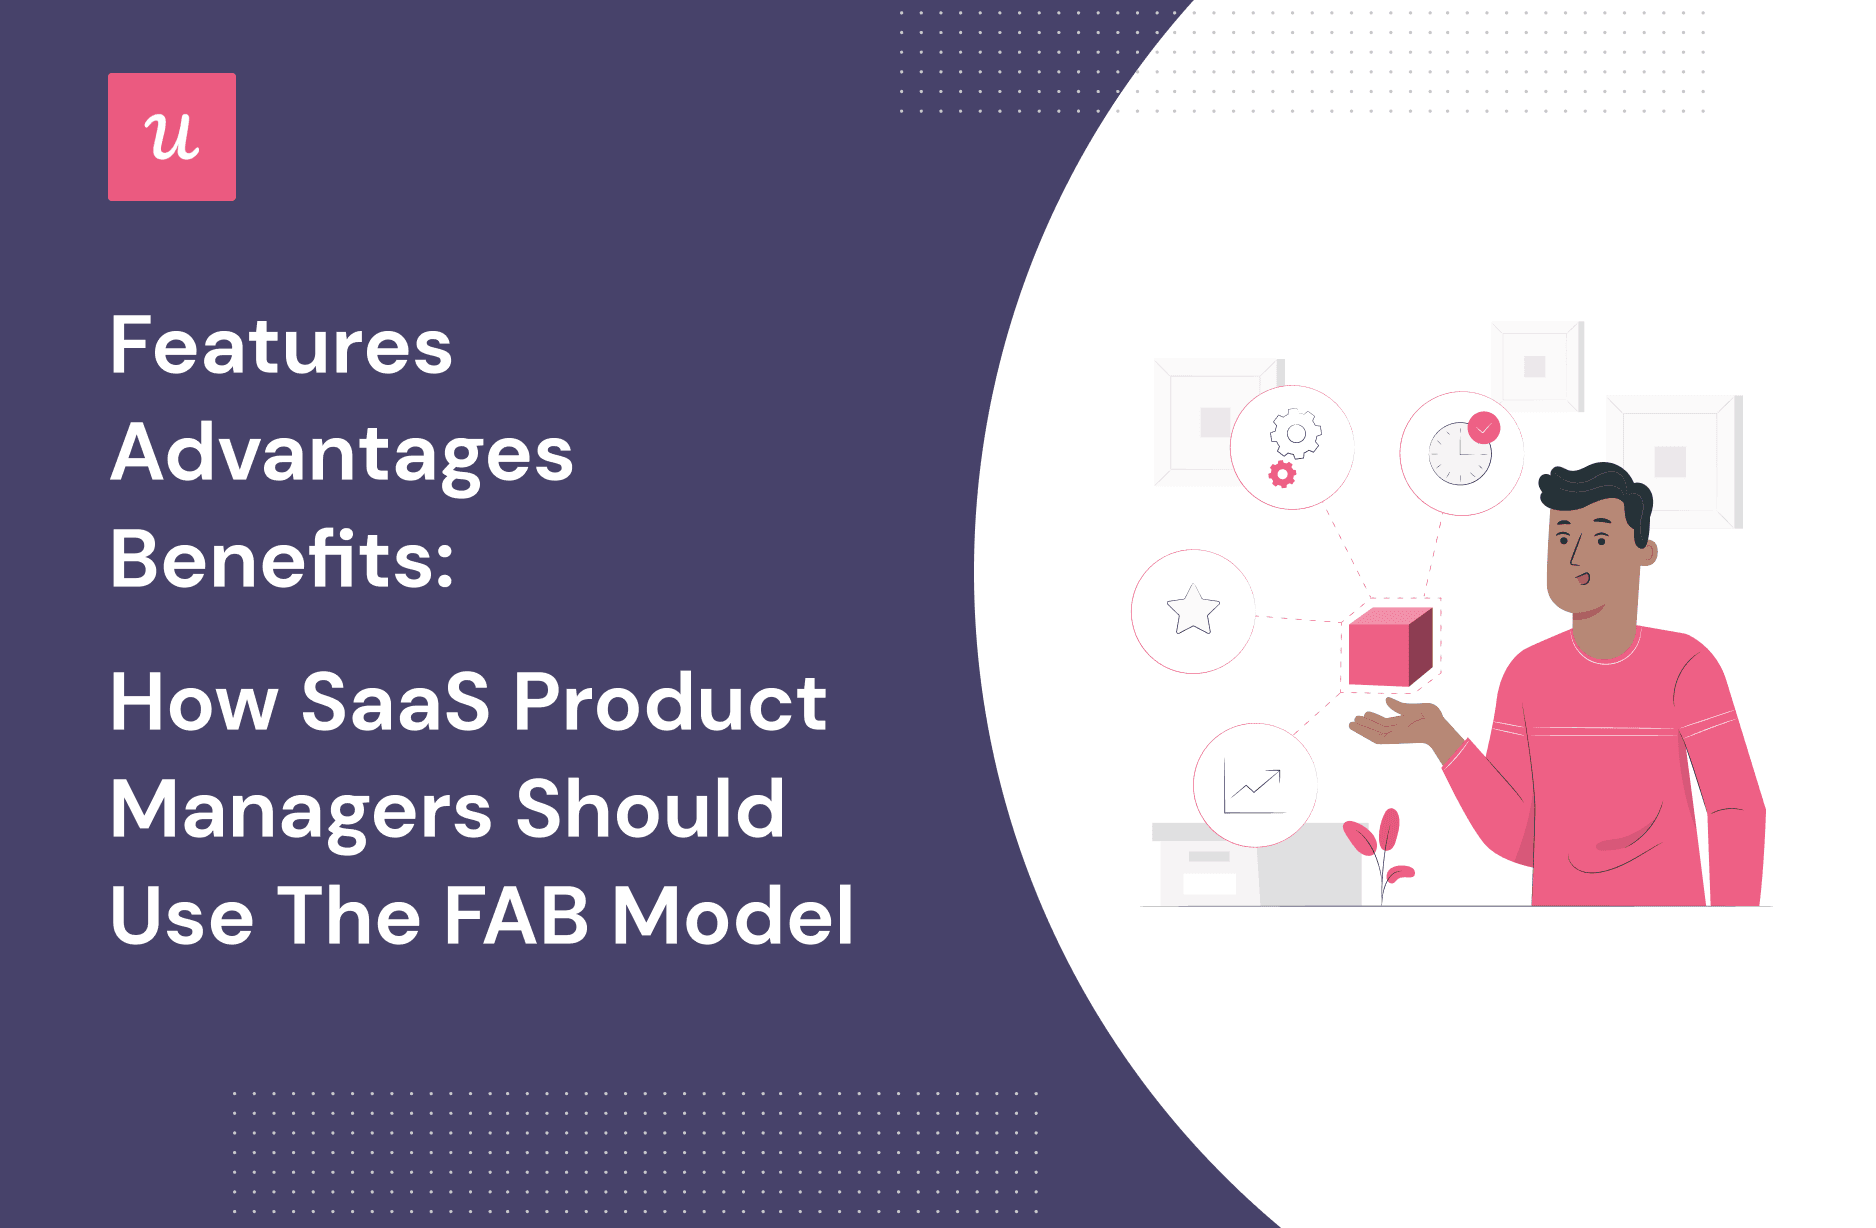 Features Advantages Benefits: How to Use the FAB Model in SaaS